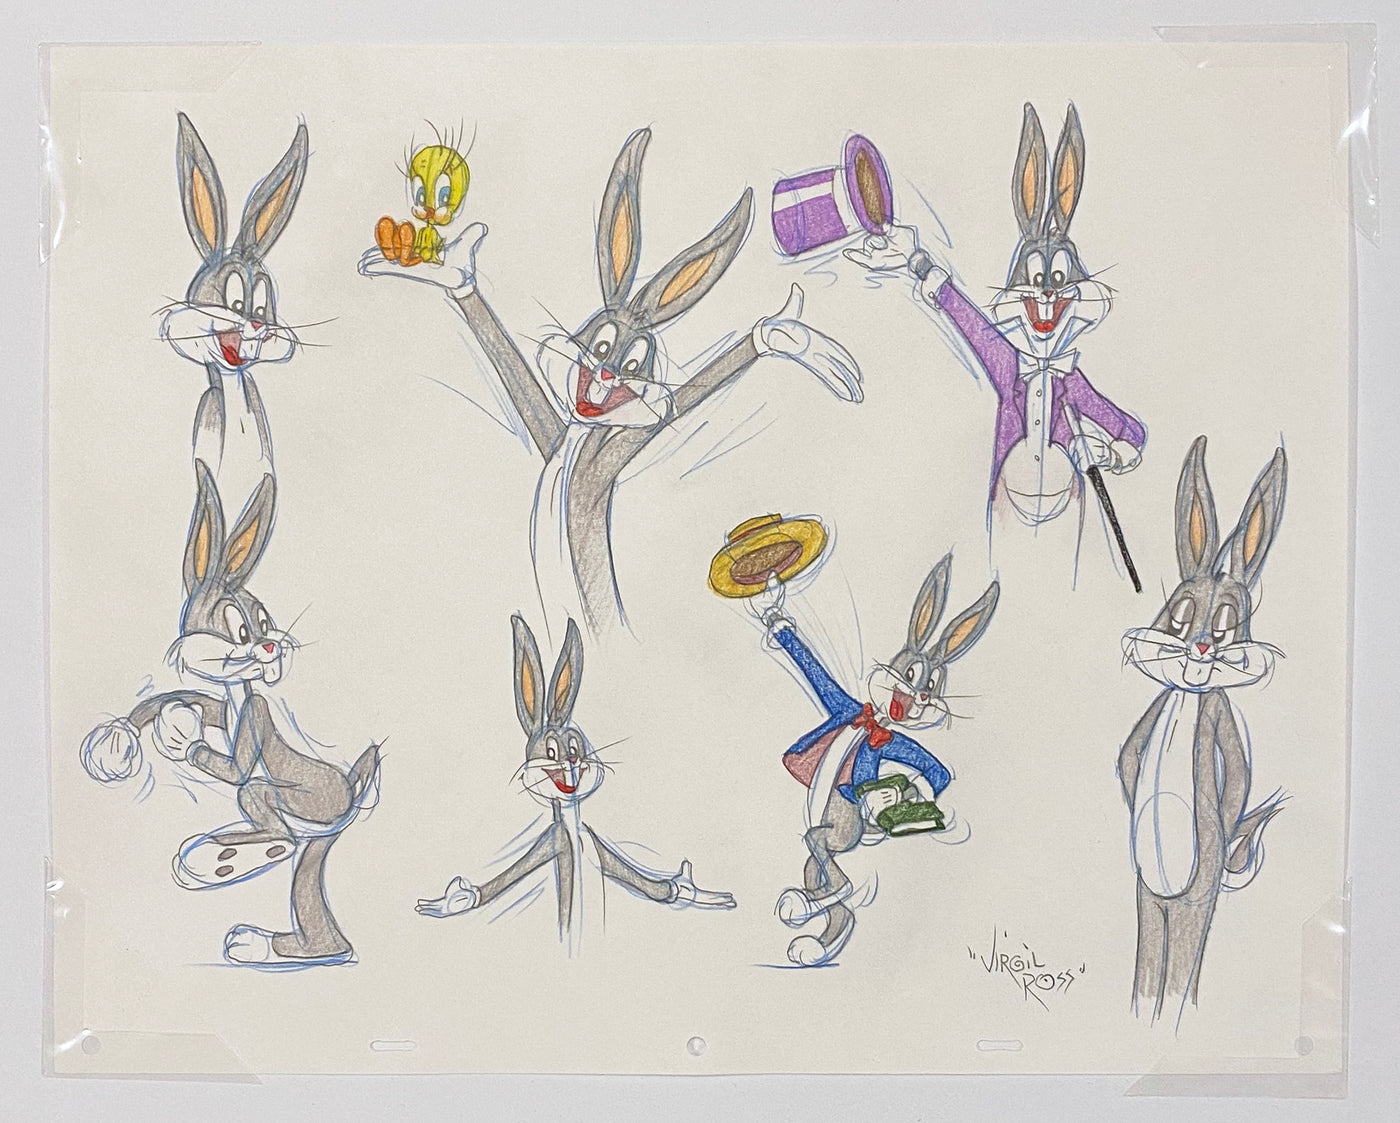 Original Warner Brothers Virgil Ross Model Sheet Animation Drawing featuring Bugs Bunny and Tweety Bird